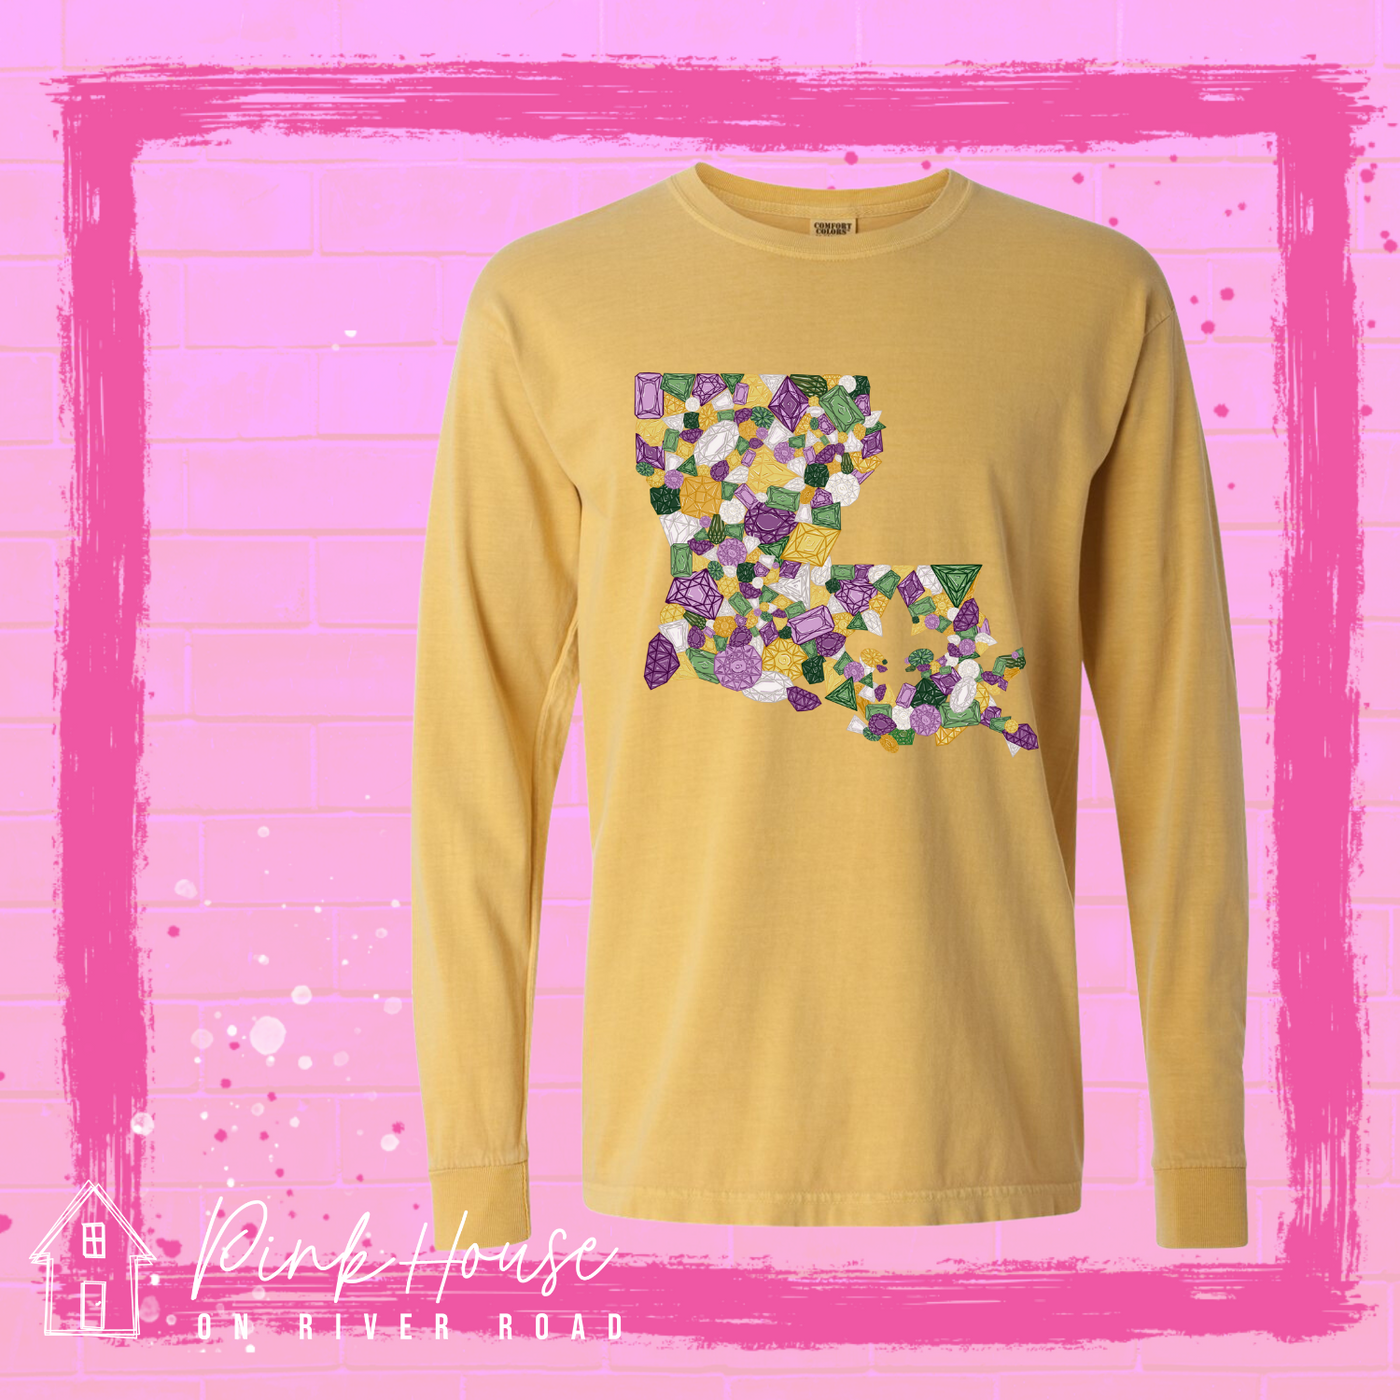 Long Sleeve yellow tee with a graphic of the state of Louisiana compromised of different shapes and sizes of purple, green, yellow and clear jewels.